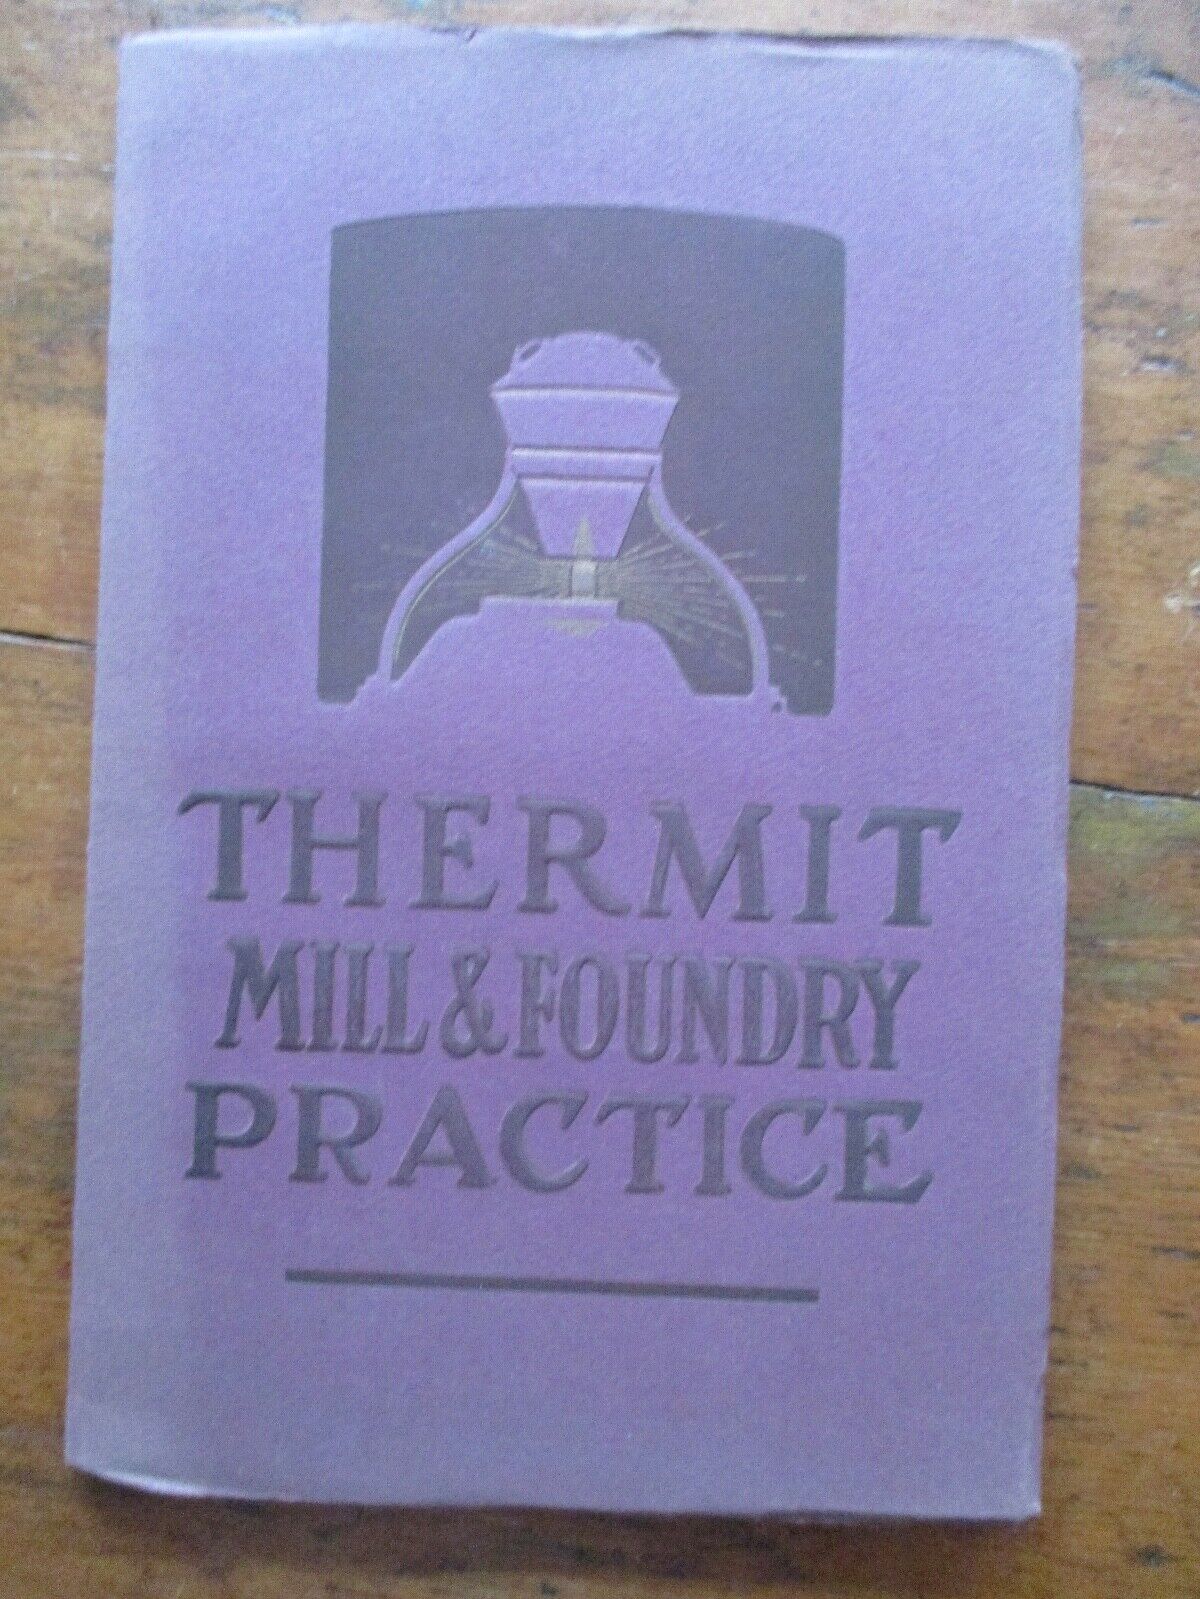 original 1920 adv booklet THERMIT MILL & FOUNDRY PRACTICE METAL &  THERMIT CORP